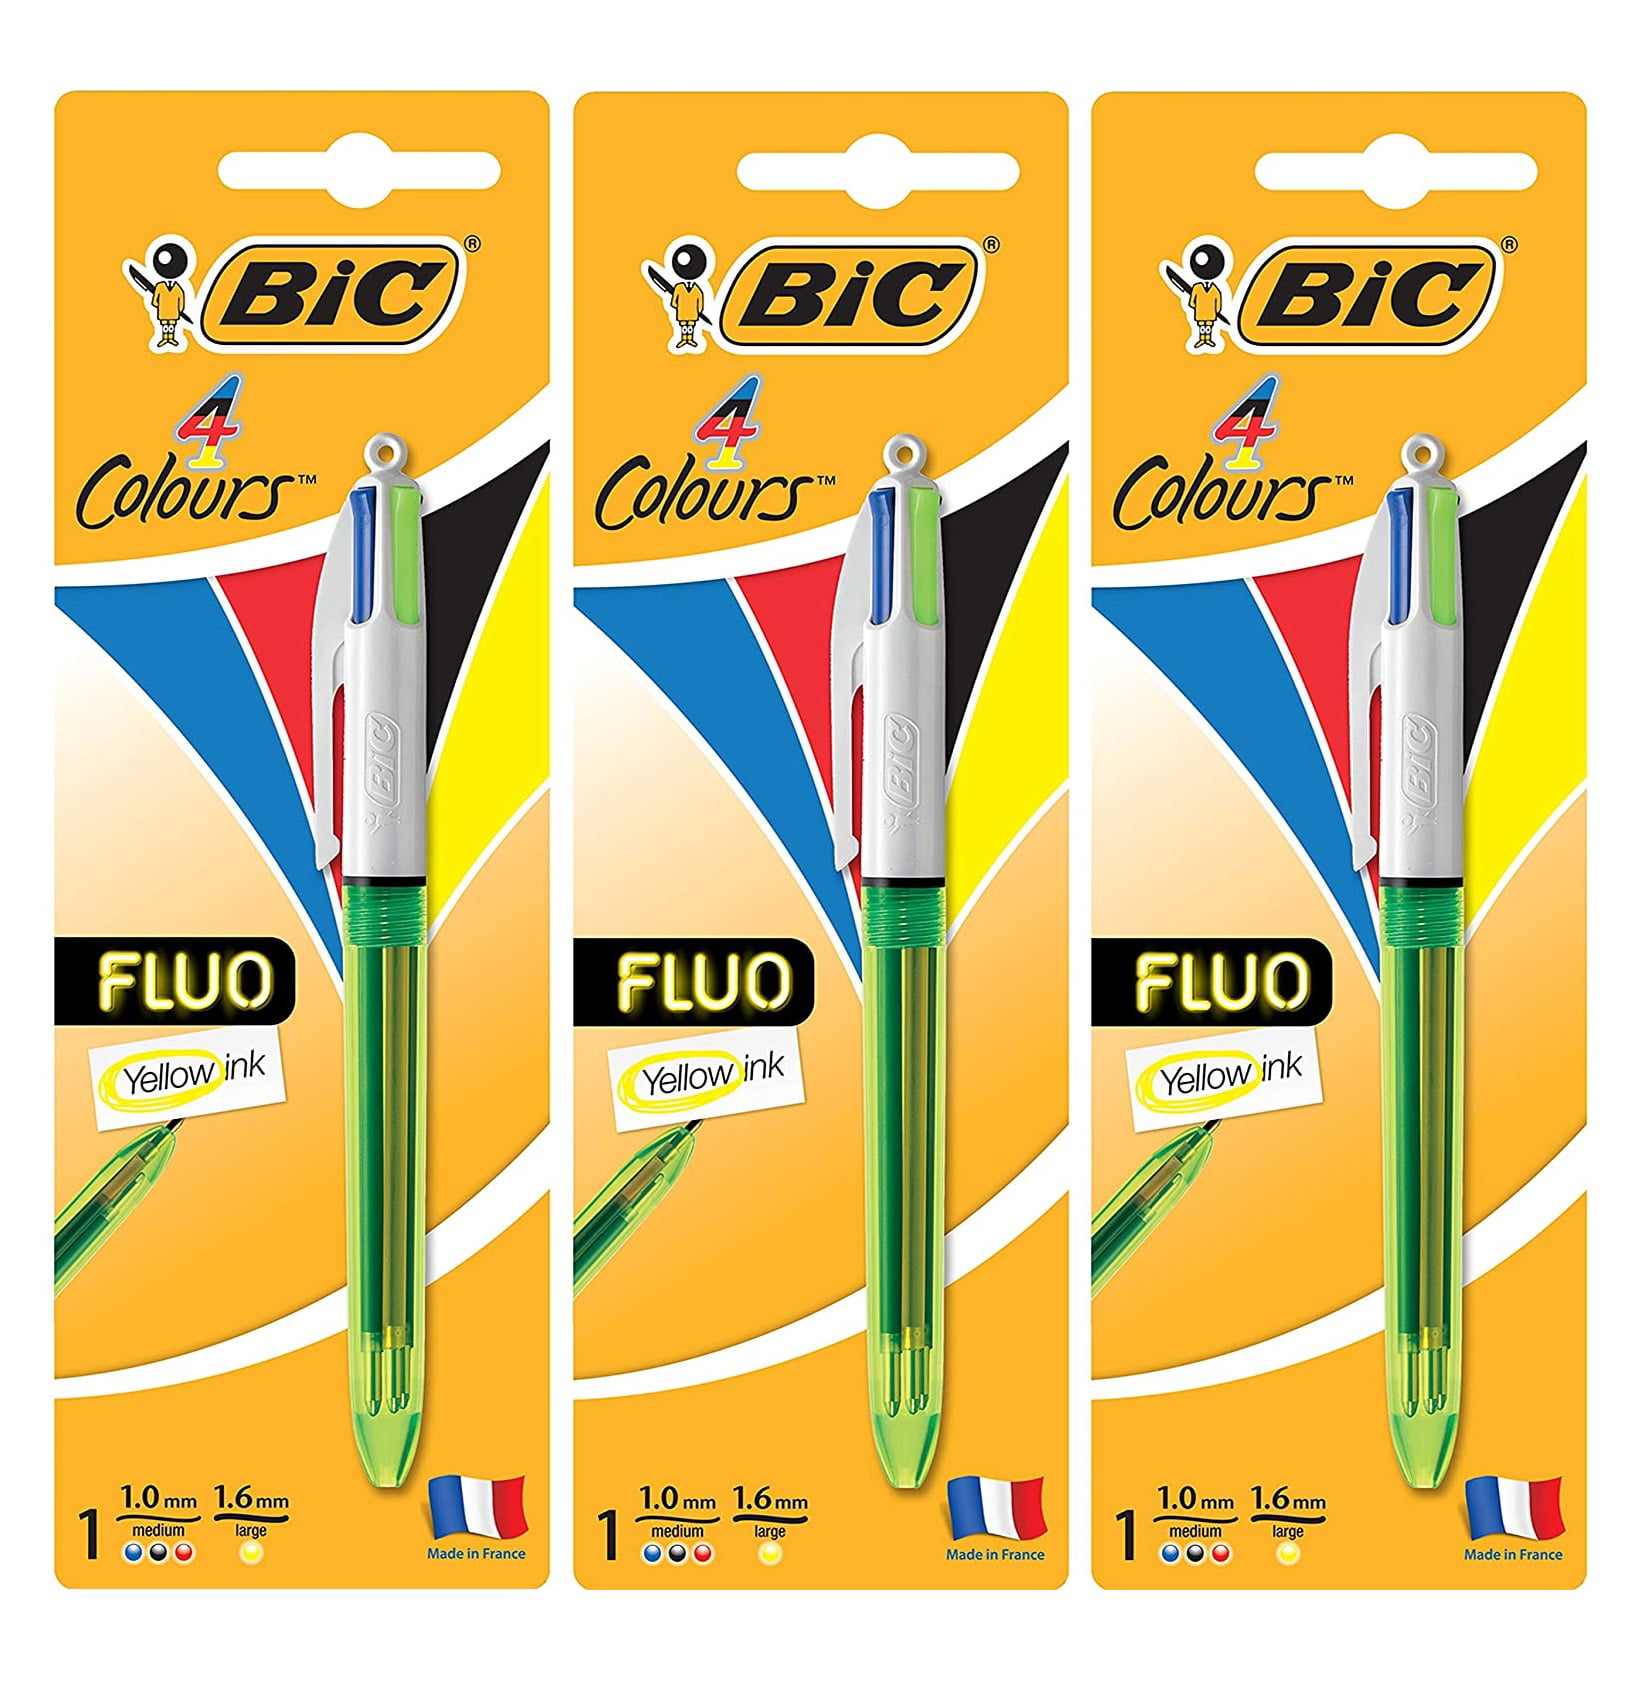 NEW IN PACKET BIC 4 COLOUR FLUO BALLPOINT PEN 